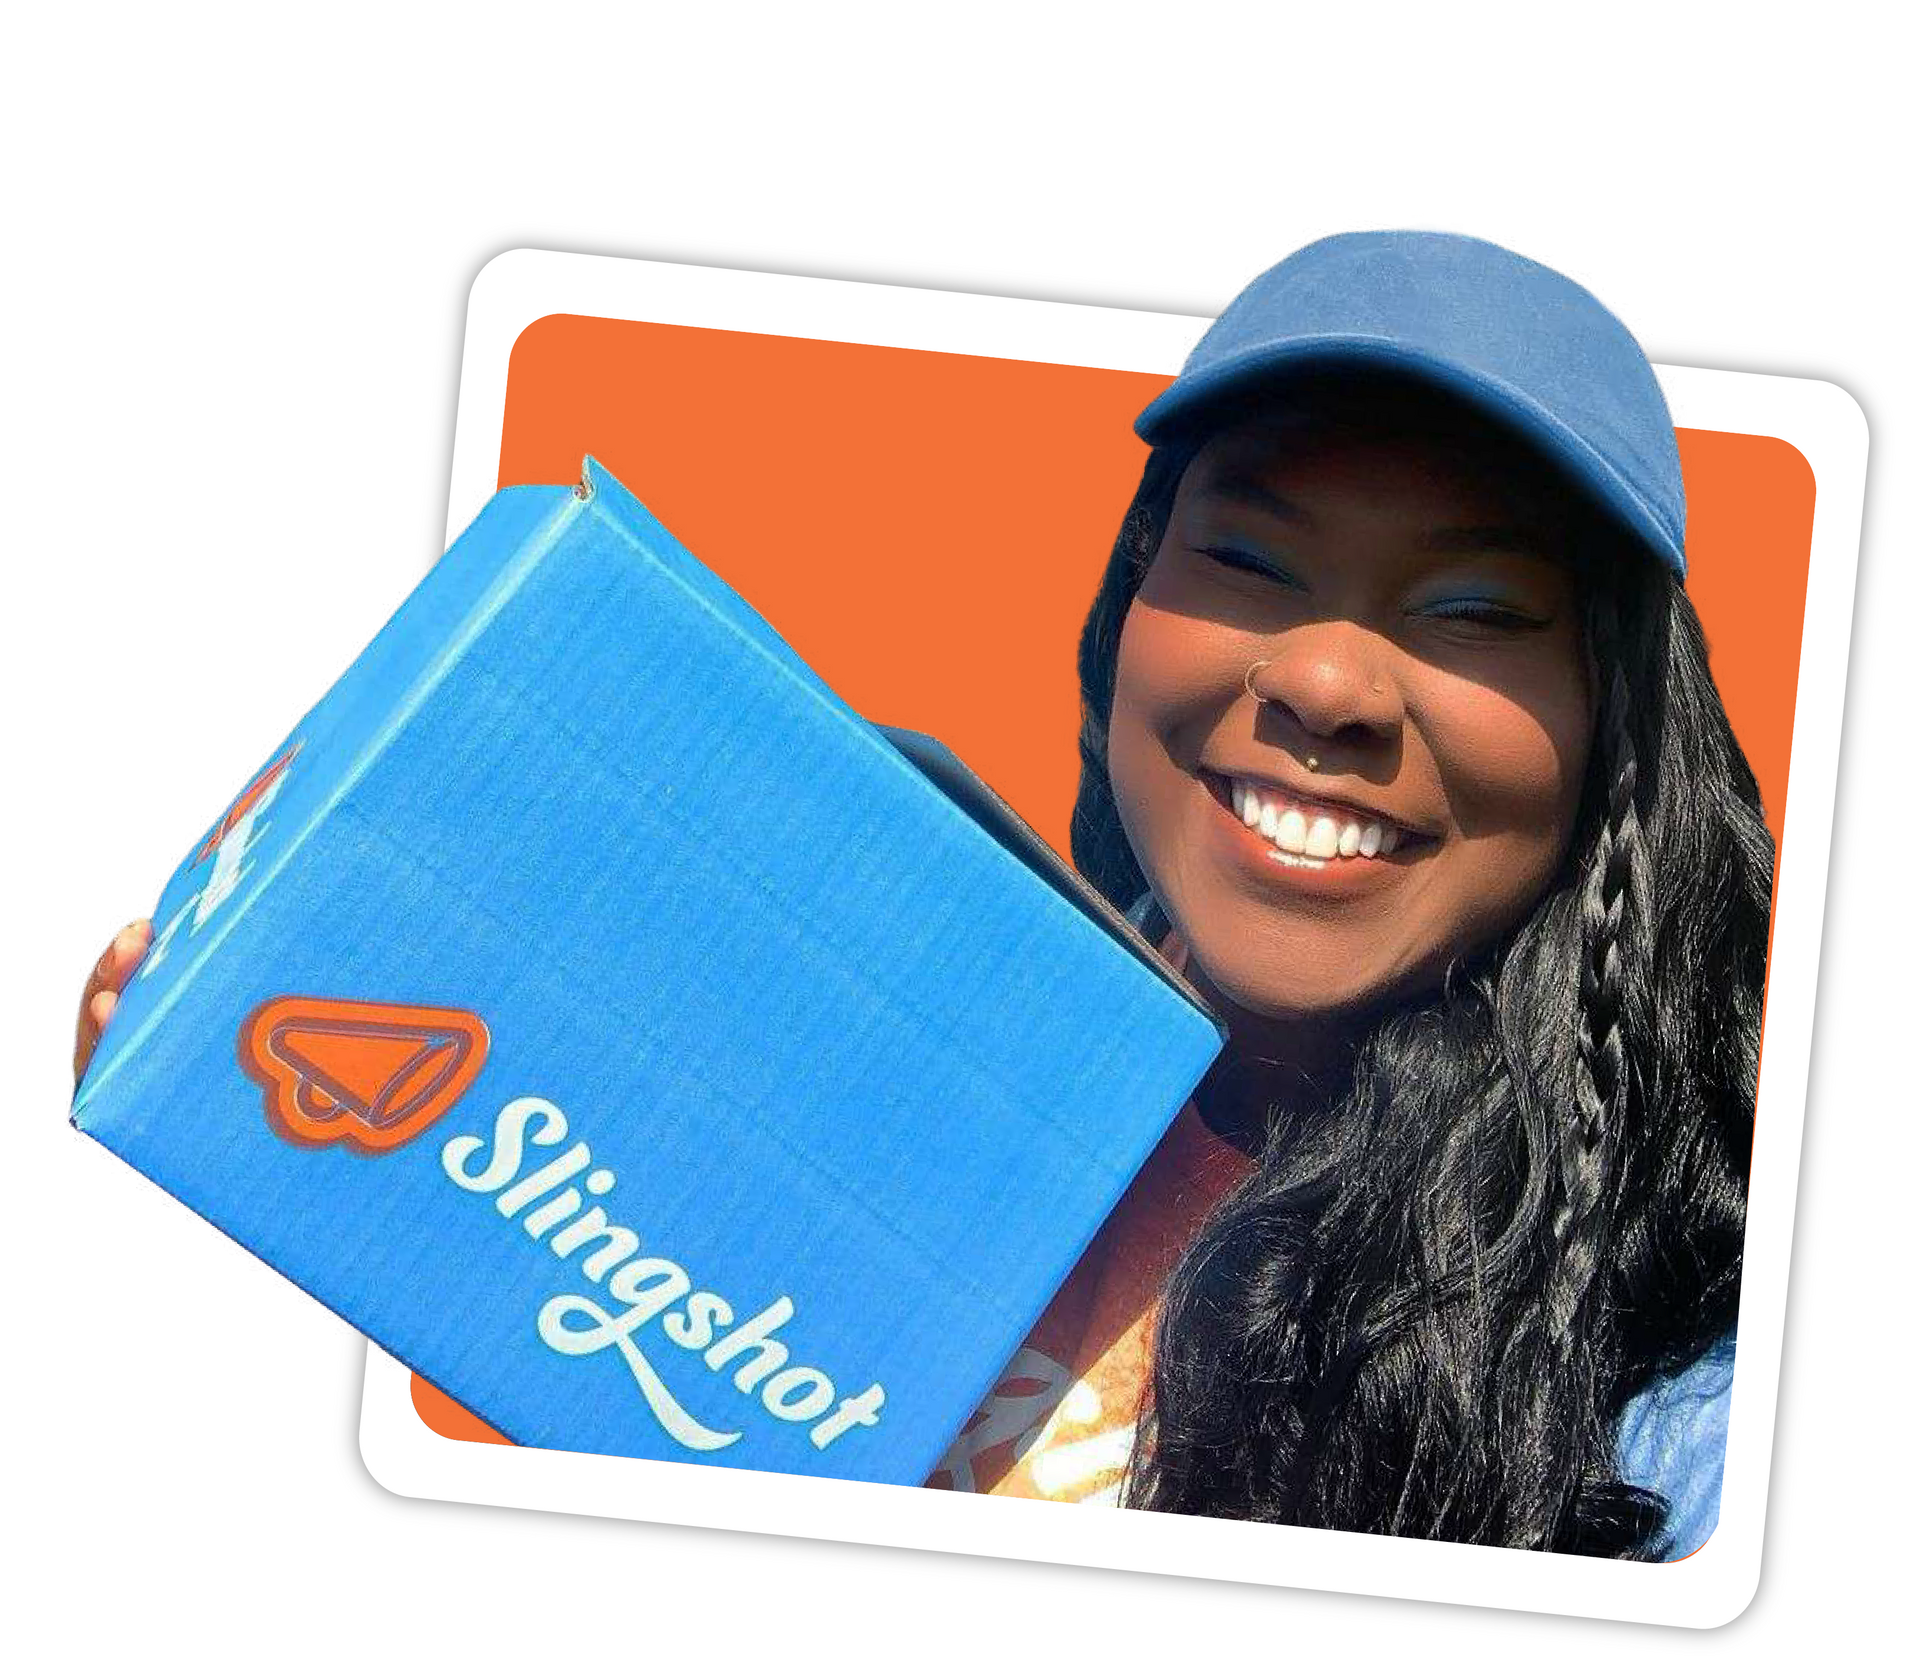 a woman holding a blue box that says slingshot on it